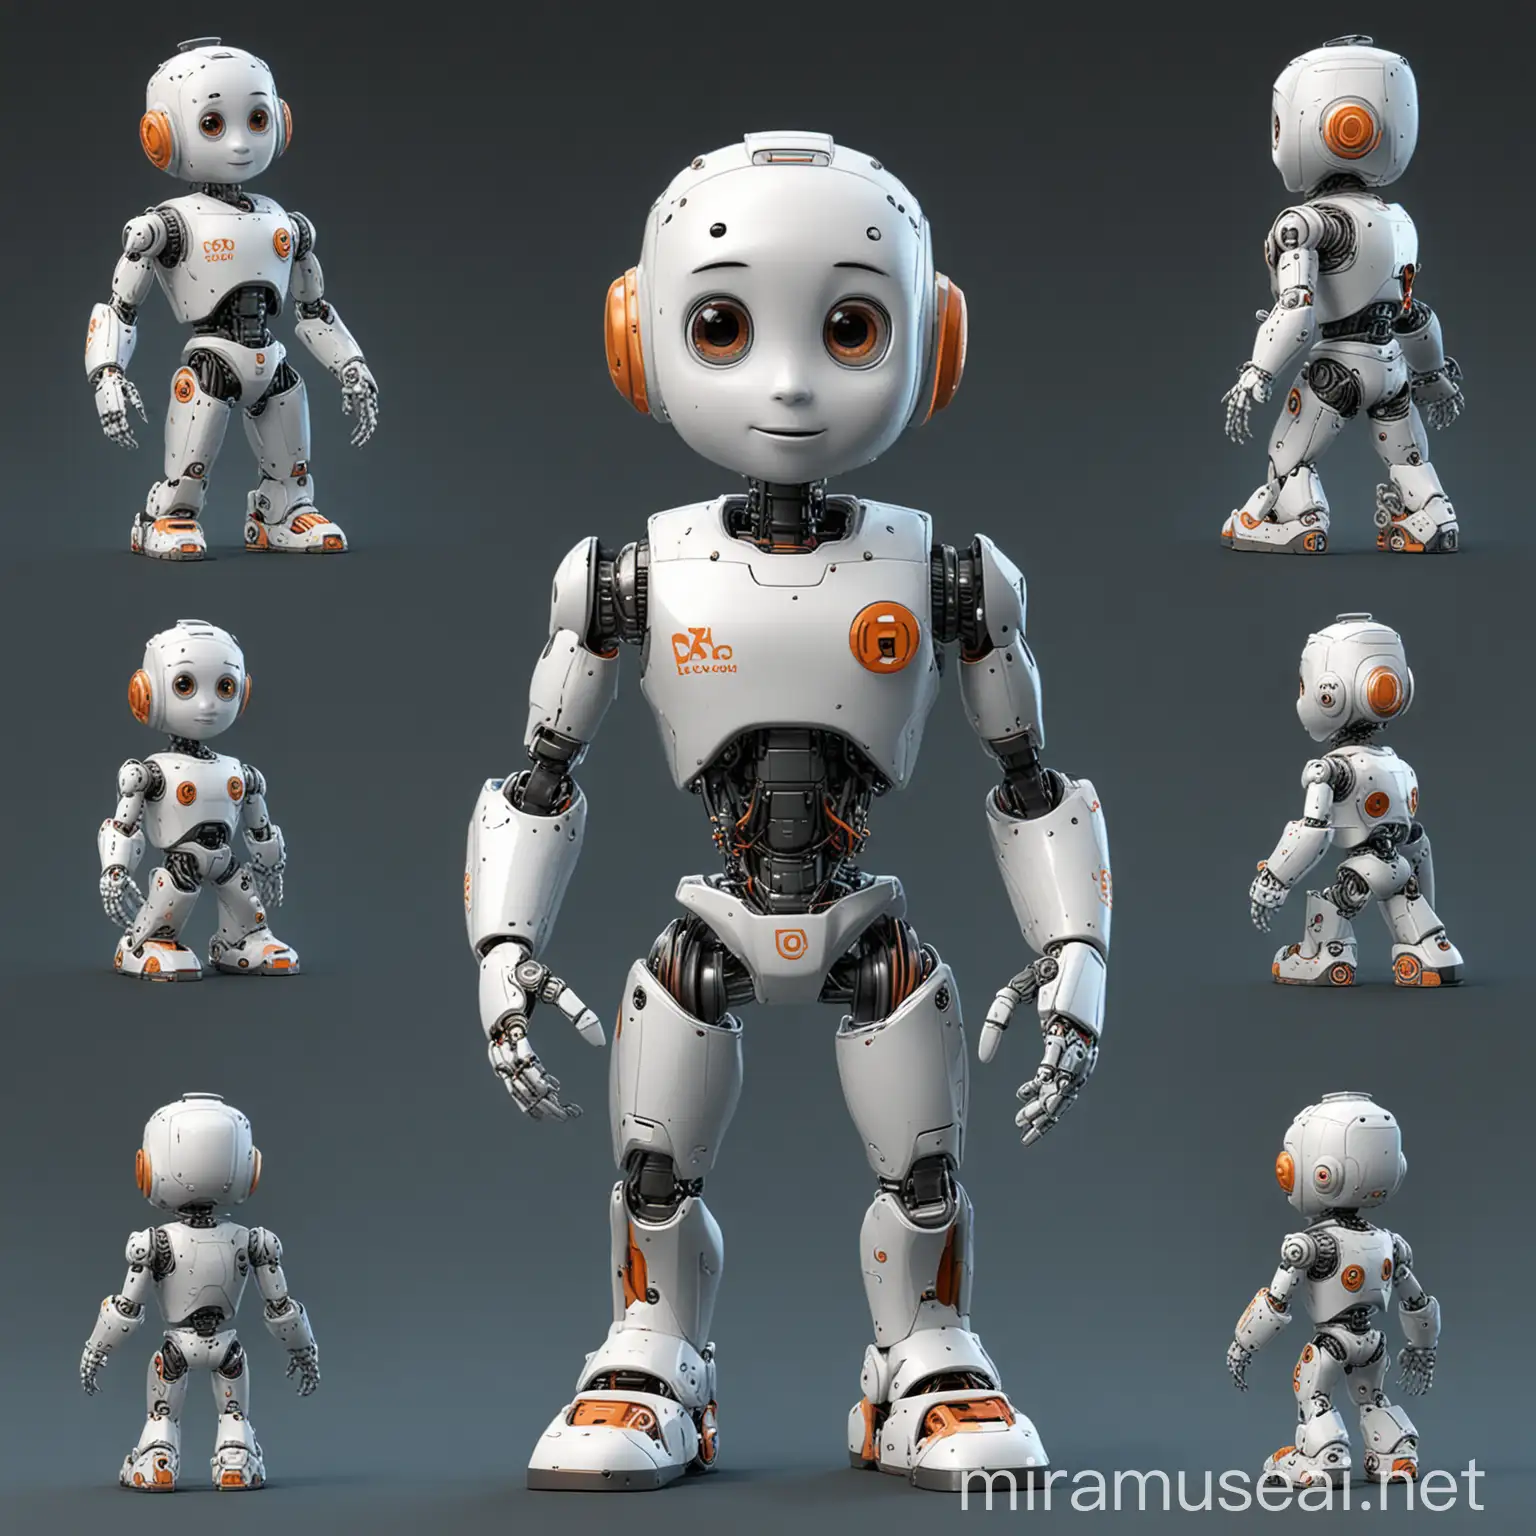 Koddi the little cute AI robot man who teach programming, 3d pixar style, multiple poses and expressions, character sheet --ar 19:9